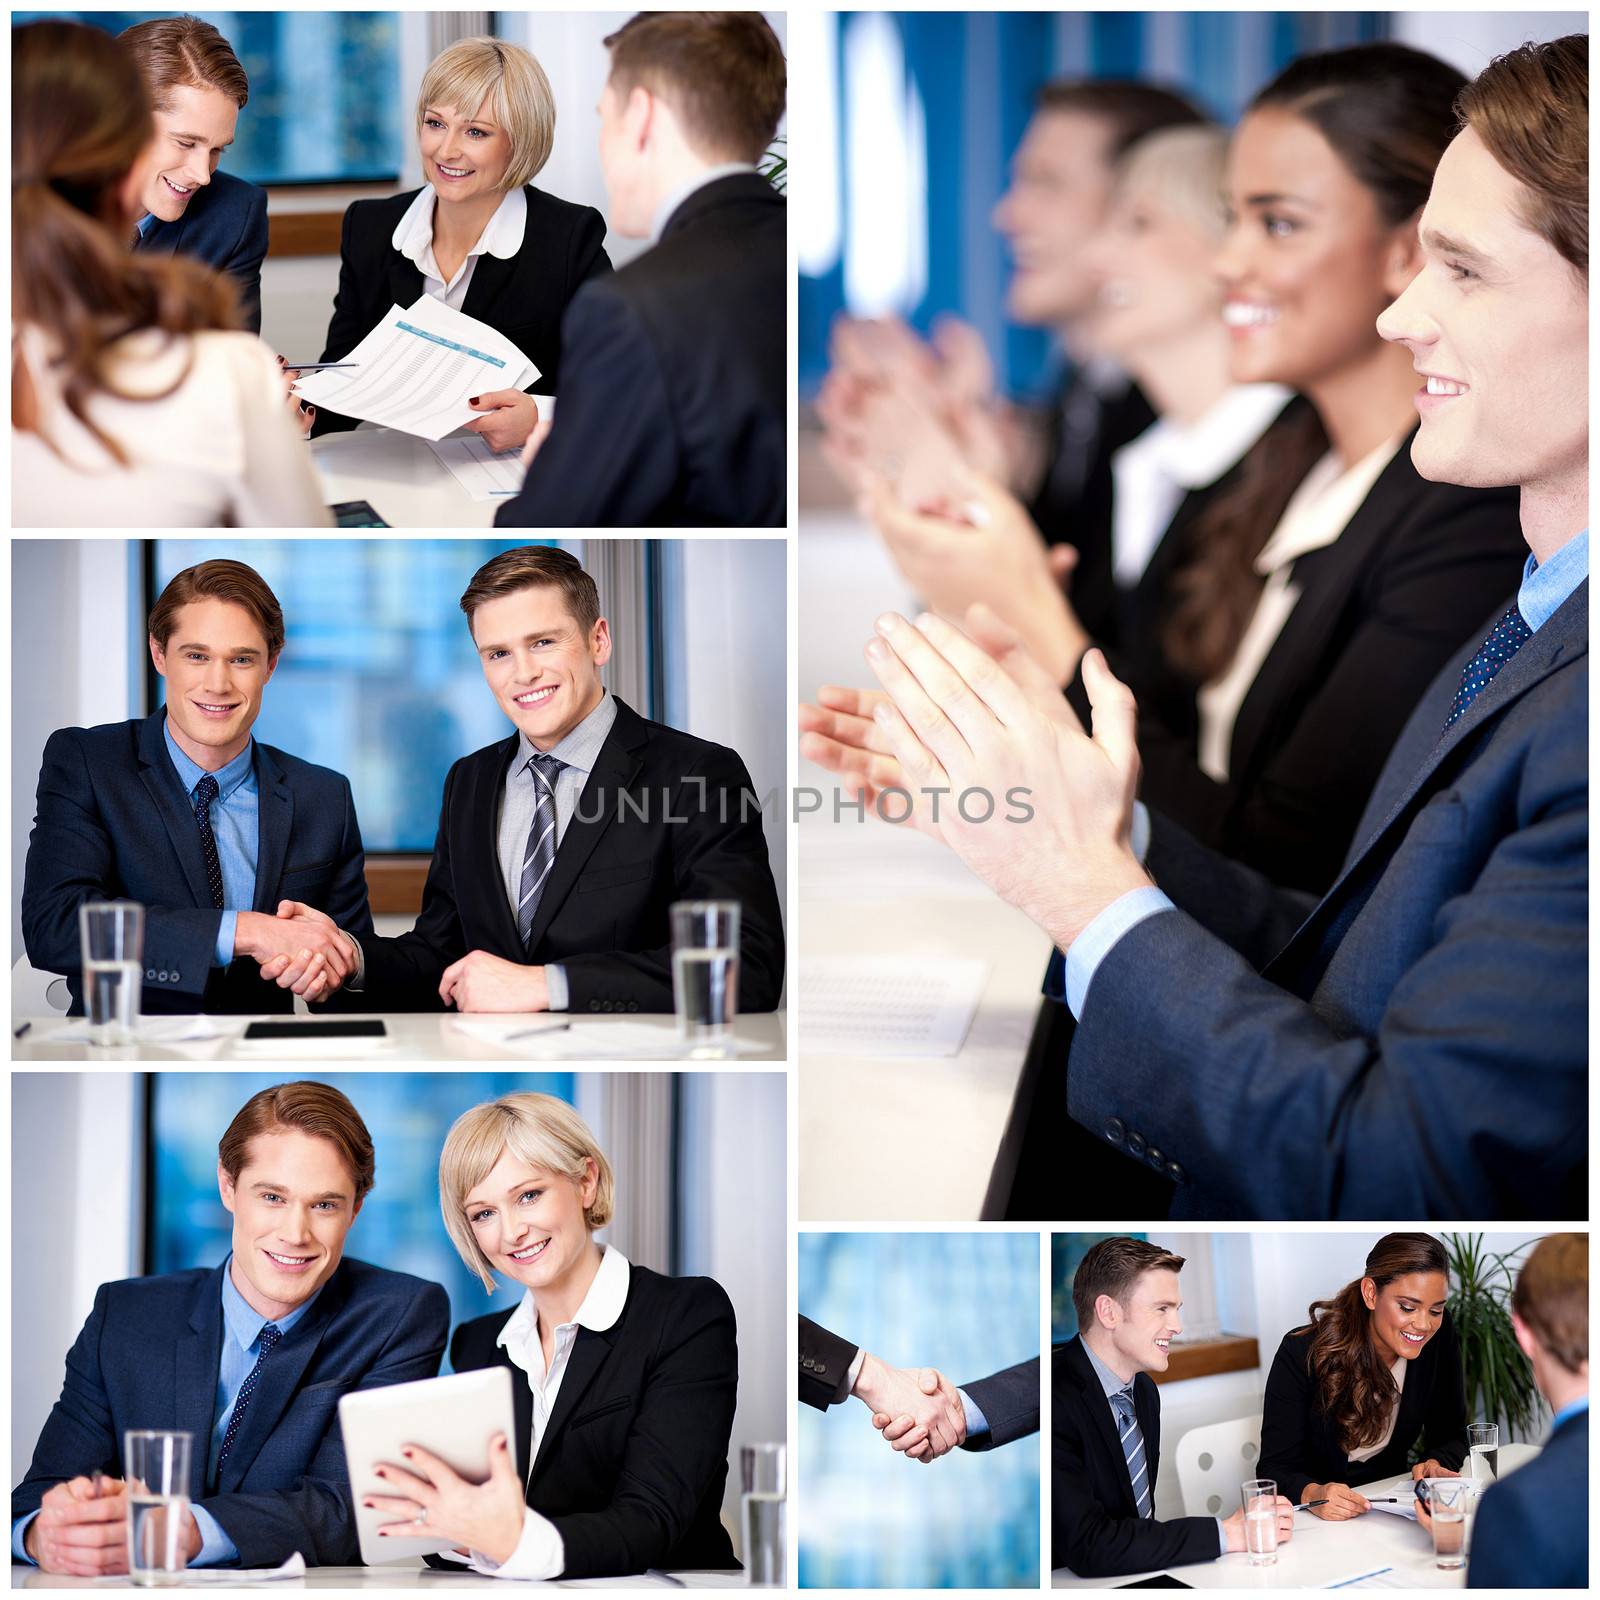 Business professionals conducting a meeting